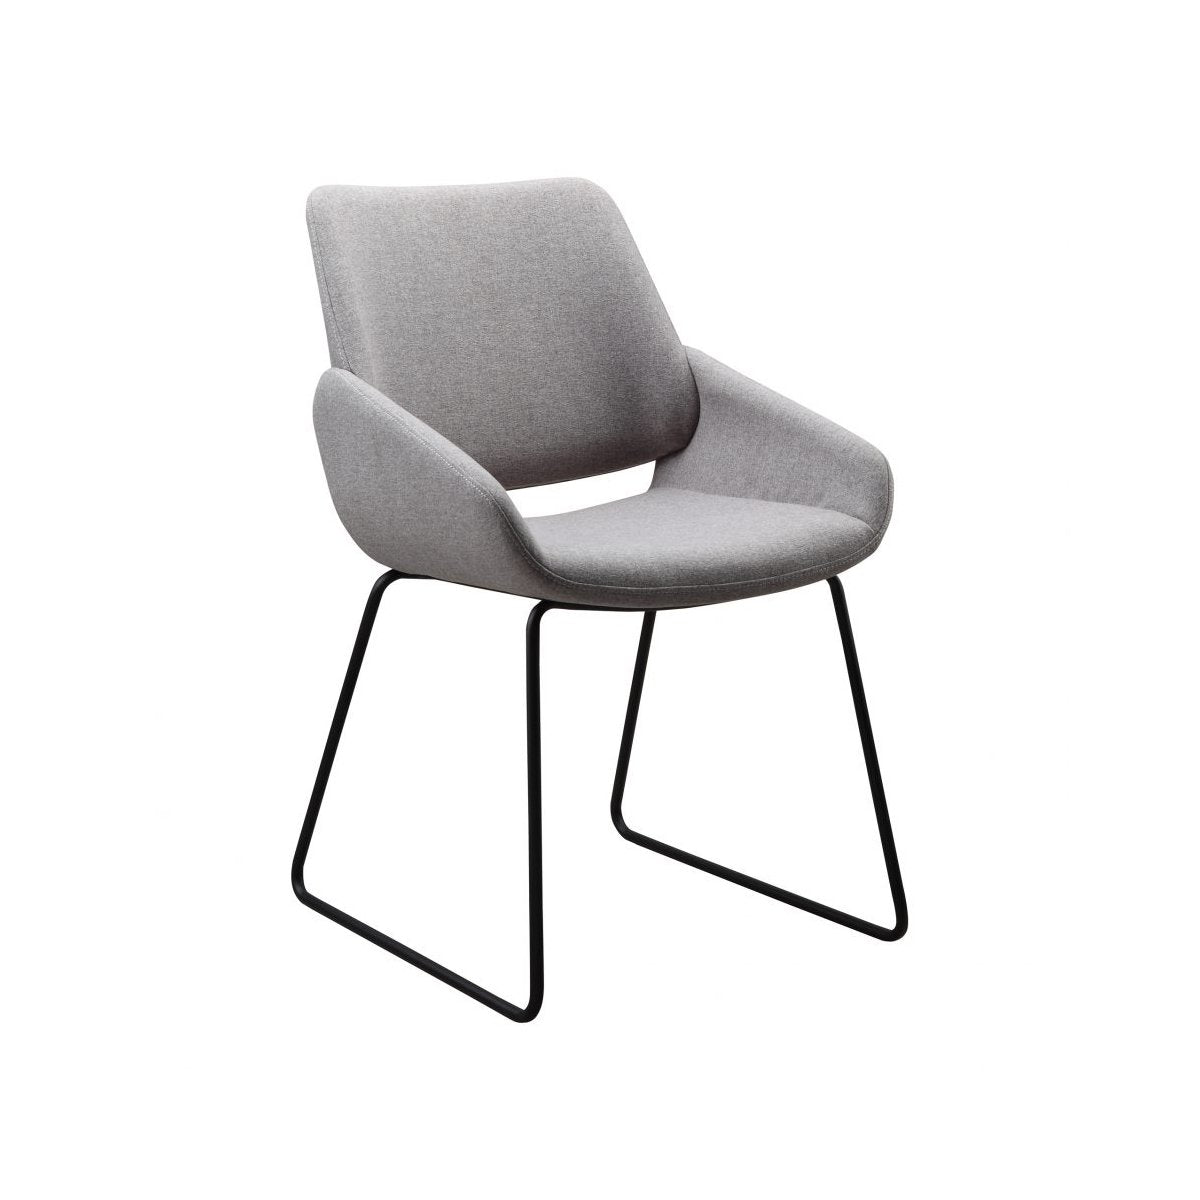 Load image into Gallery viewer, Lisboa Dining Chair Light Grey Dining Chairs Moe&amp;#39;s     Four Hands, Burke Decor, Mid Century Modern Furniture, Old Bones Furniture Company, Old Bones Co, Modern Mid Century, Designer Furniture, https://www.oldbonesco.com/
